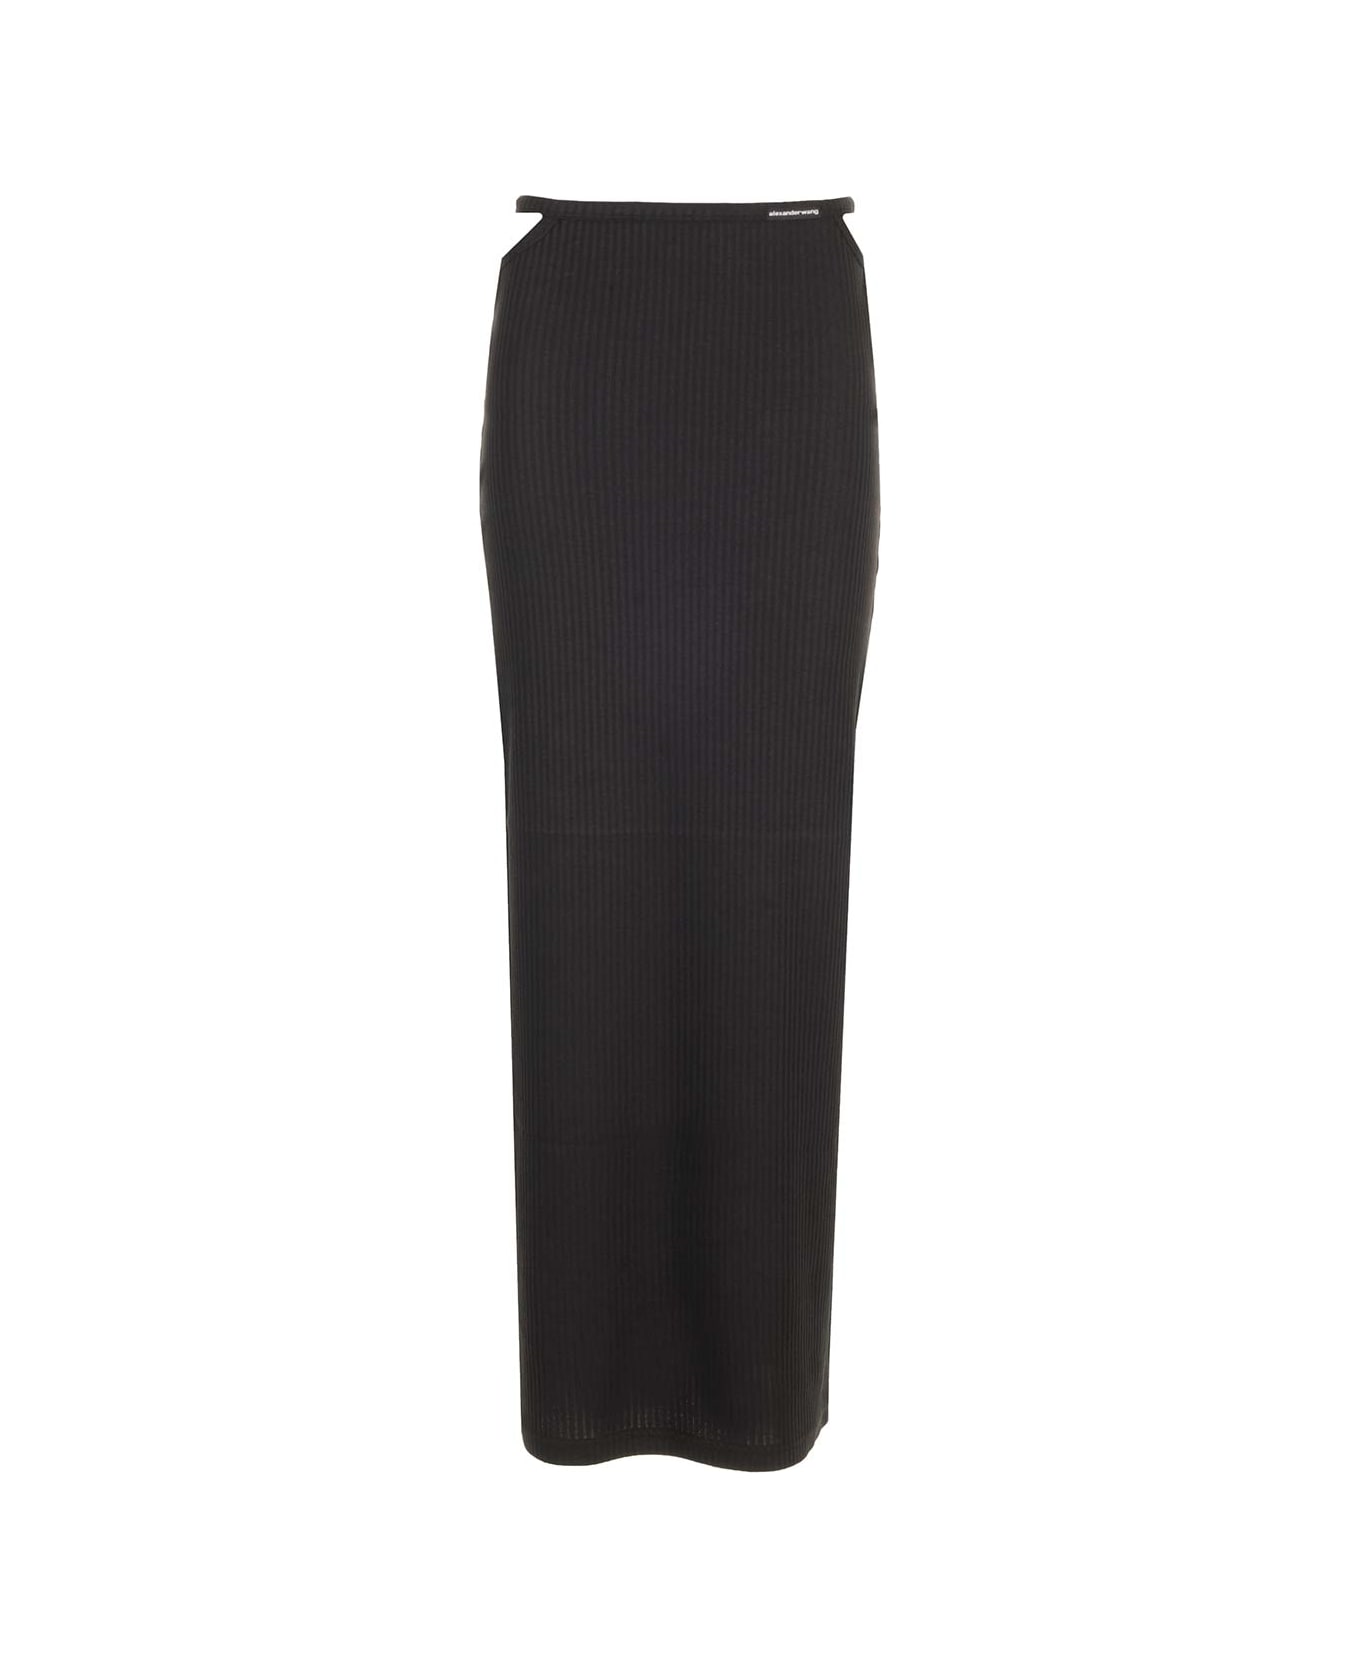 Alexander Wang Long Skirt In Ribbed Stretch Cotton - Black スカート